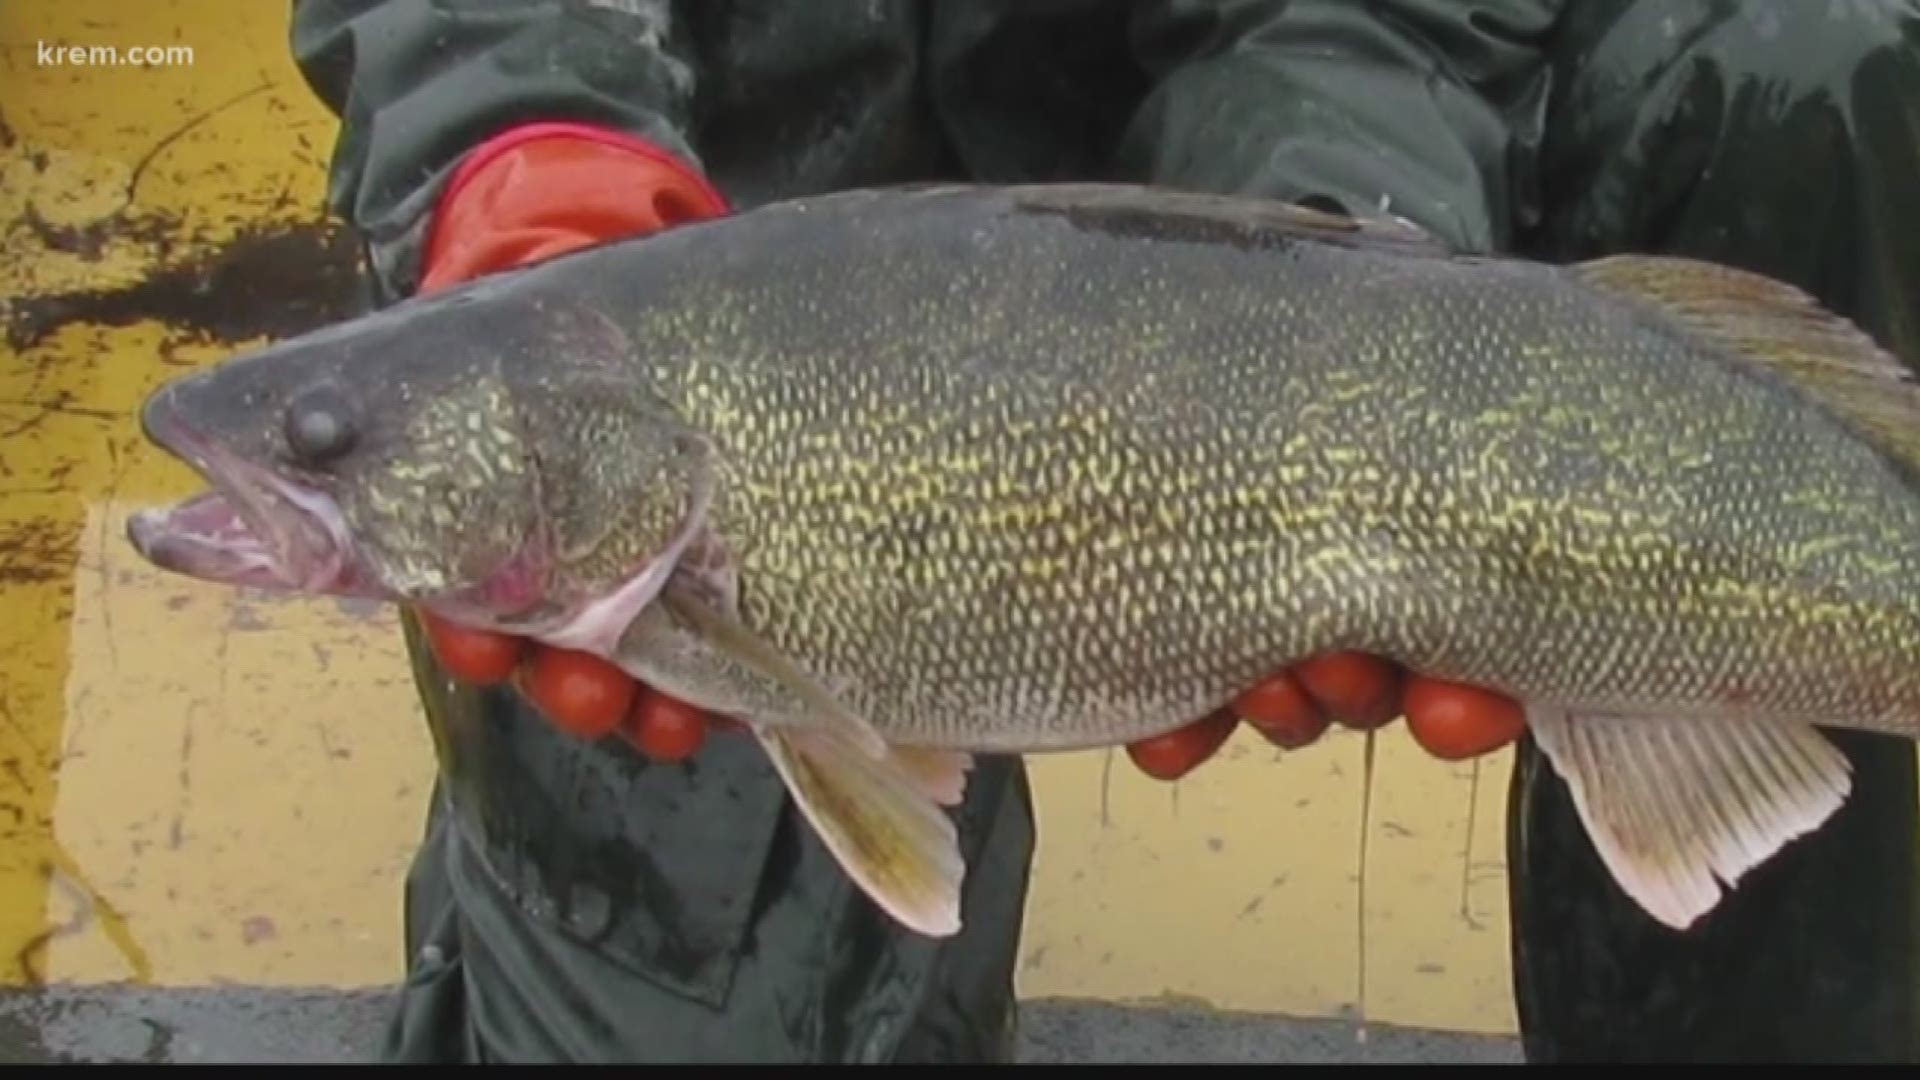 It's been several months since Idaho started offering a cash reward for catching a certain type of fish. The agency put small tags in 50 walleye fish.